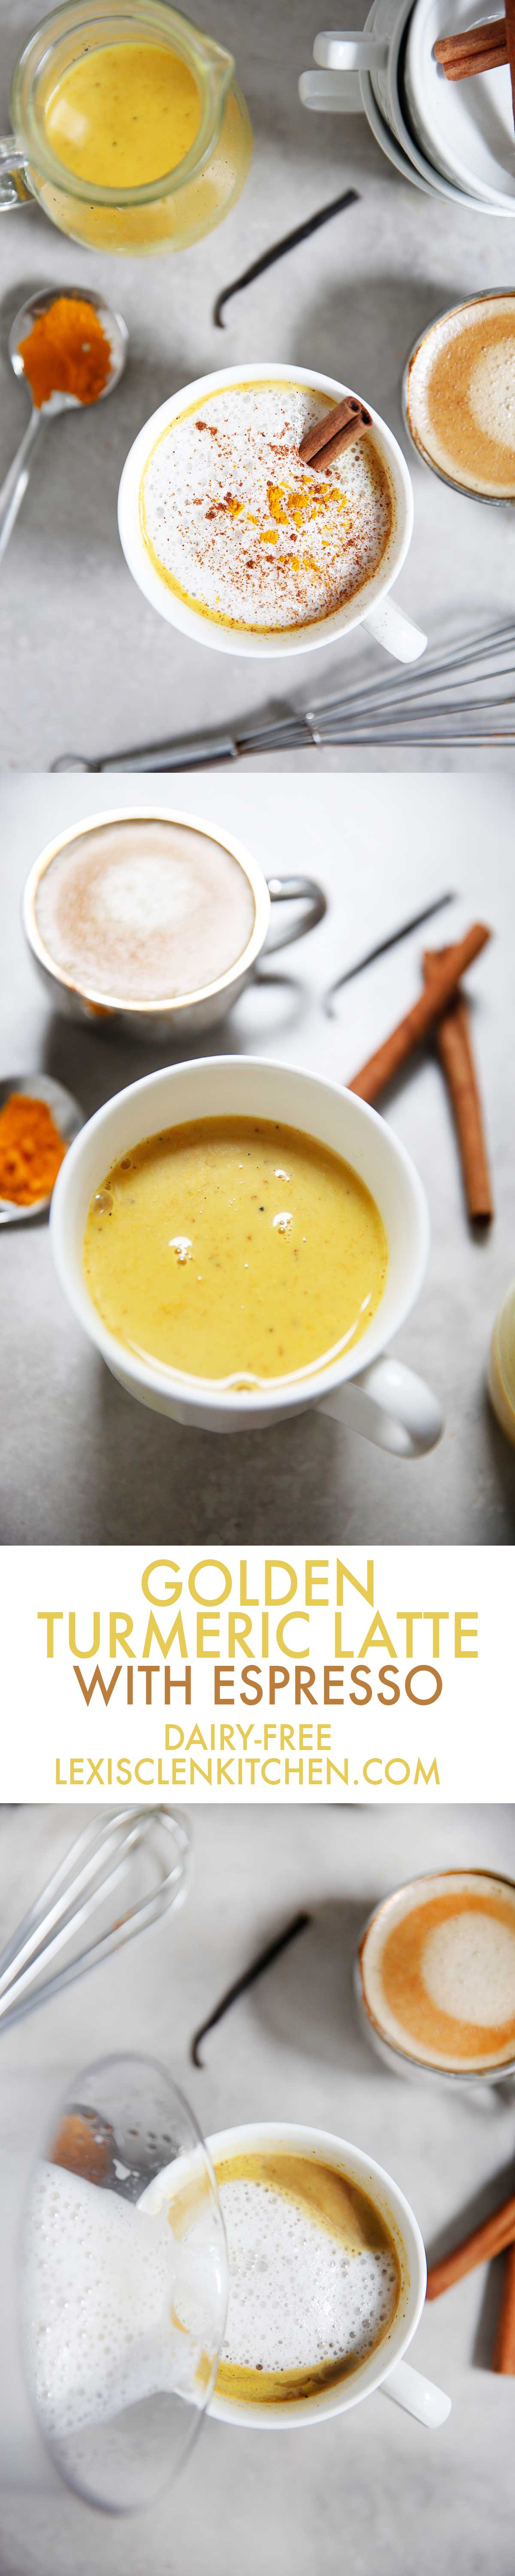 Dairy-Free Golden Turmeric Latte With Espresso | Lexi's Clean Kitchen